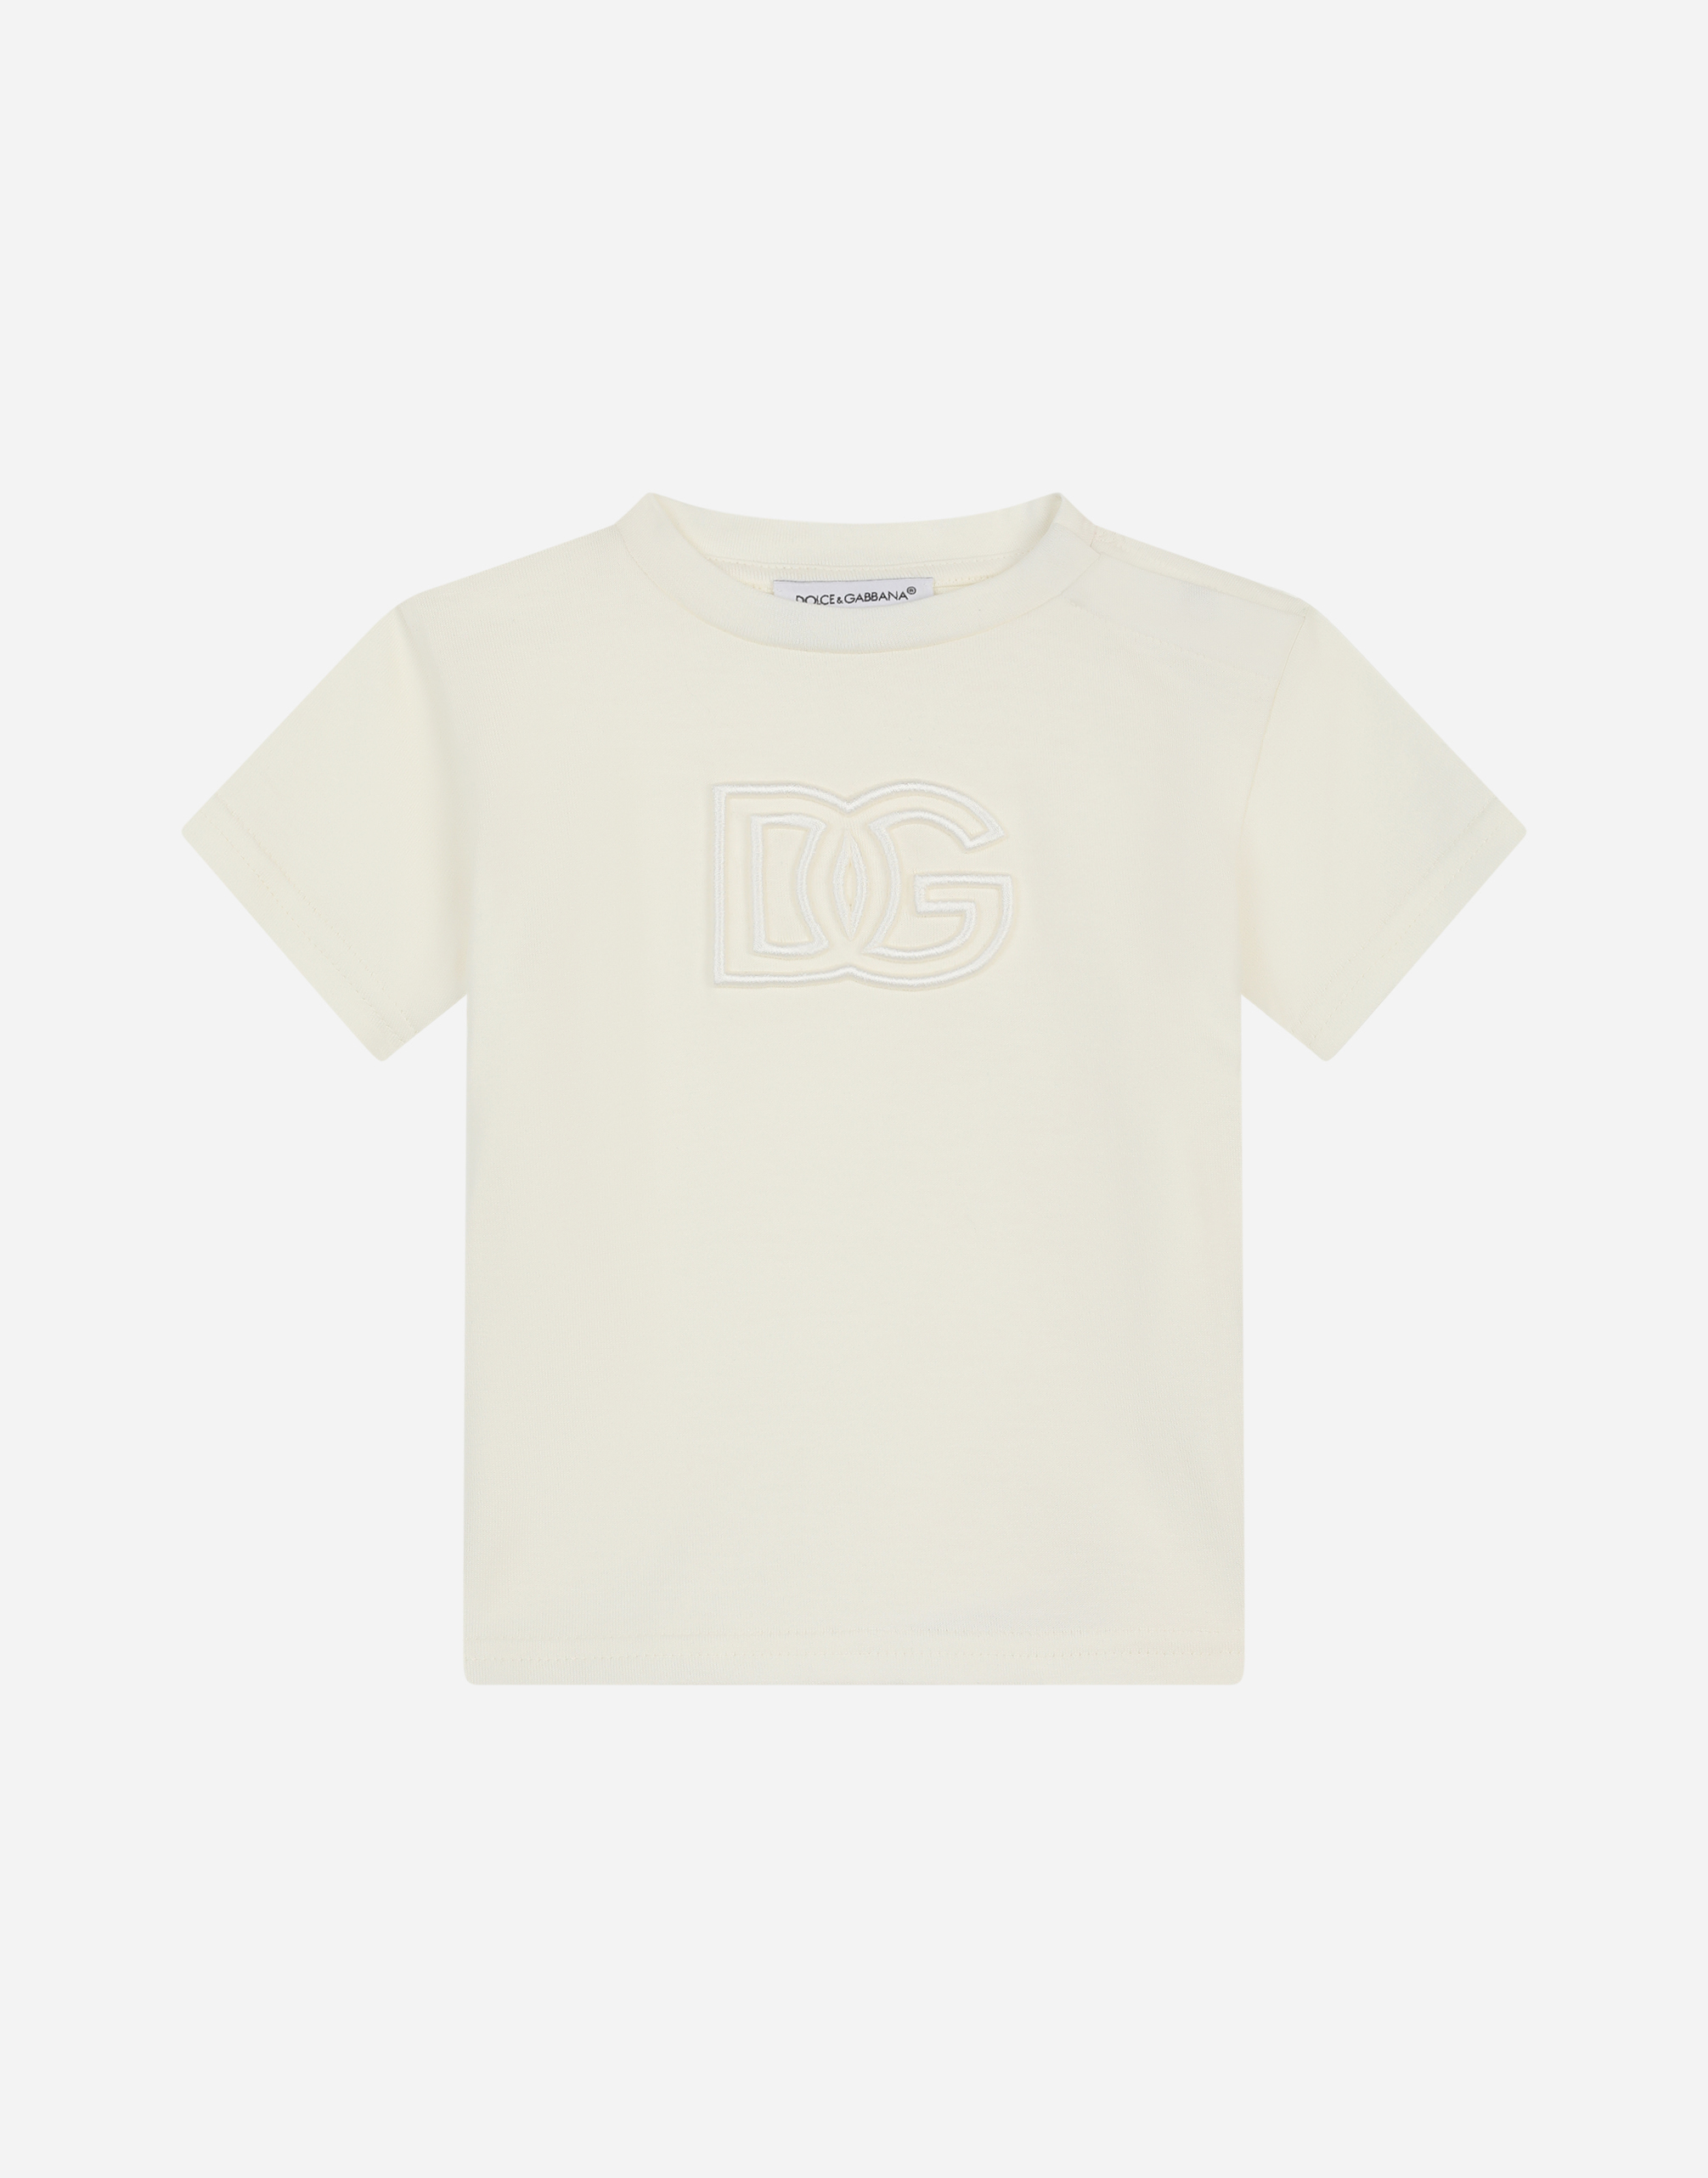 Jersey T-shirt with DG logo embroidery in White